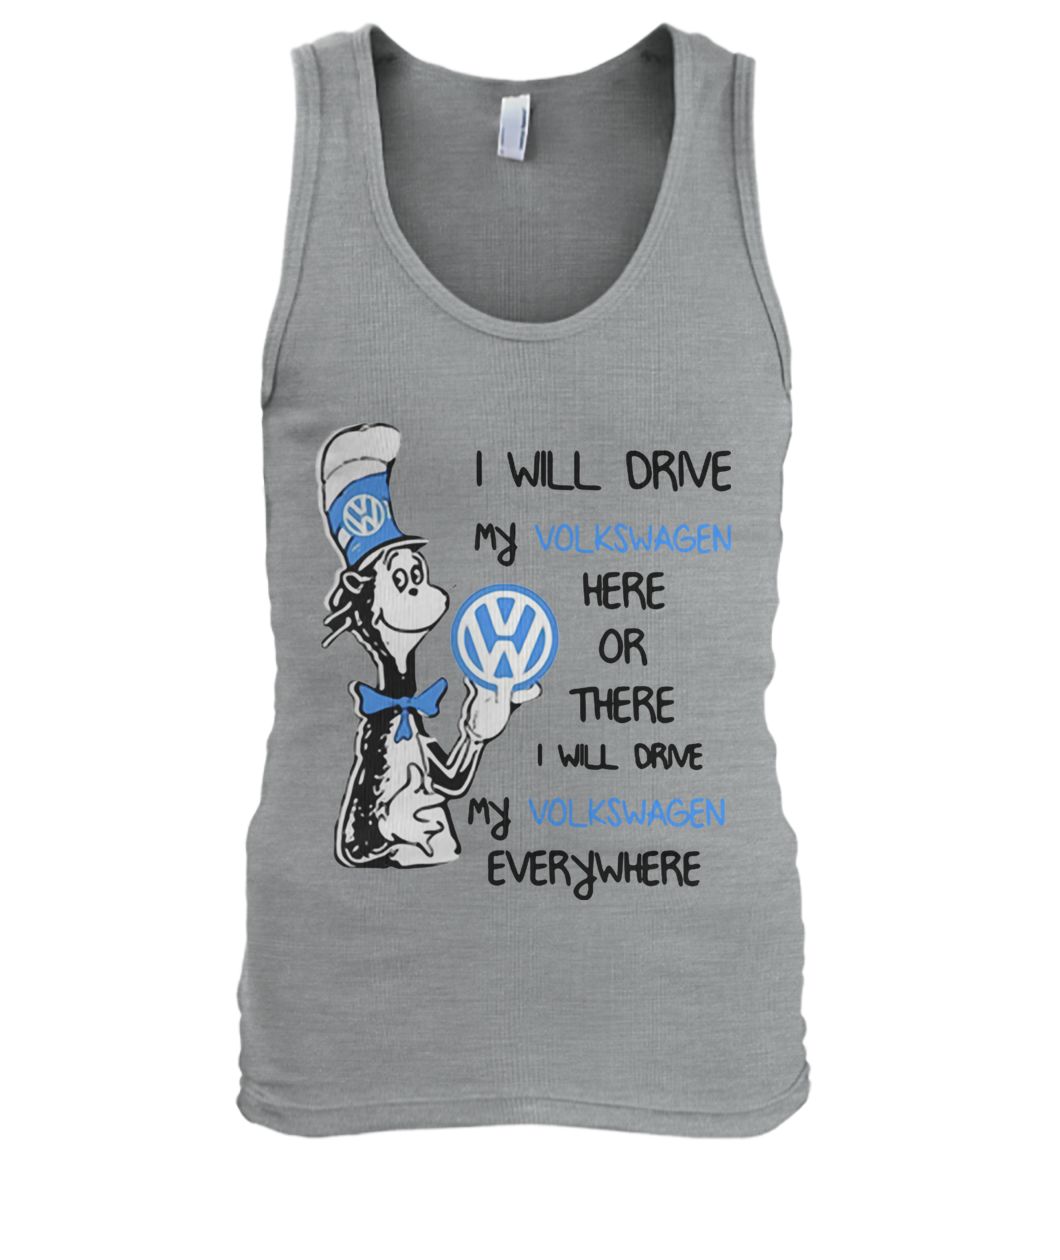 Dr seuss I will drive my volkswagen here or there I will drive my volkswagen everywhere men's tank top